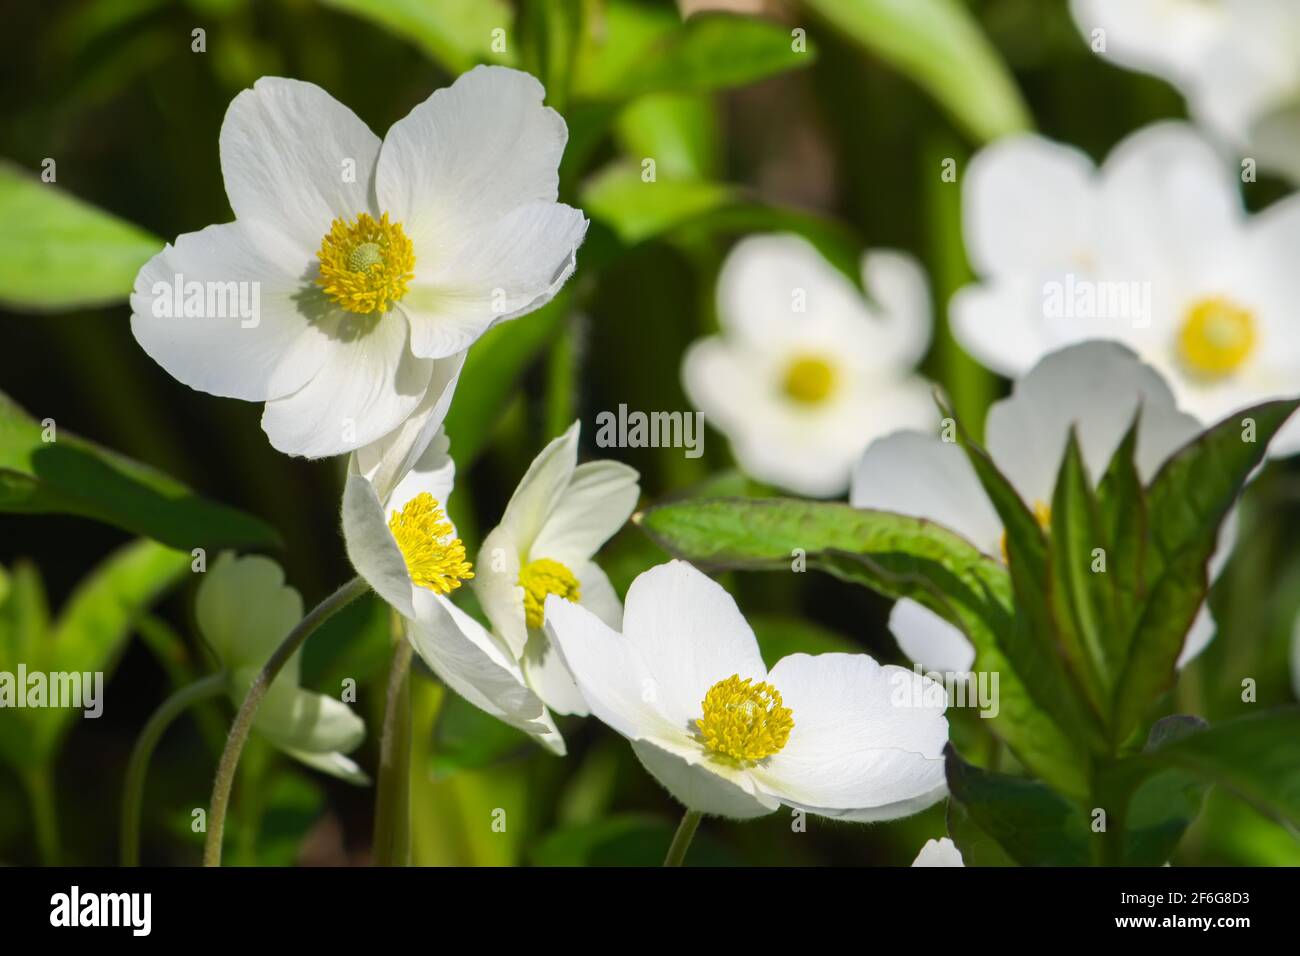 Anemona Vestal beautiful white flowers growing in the park Stock Photo